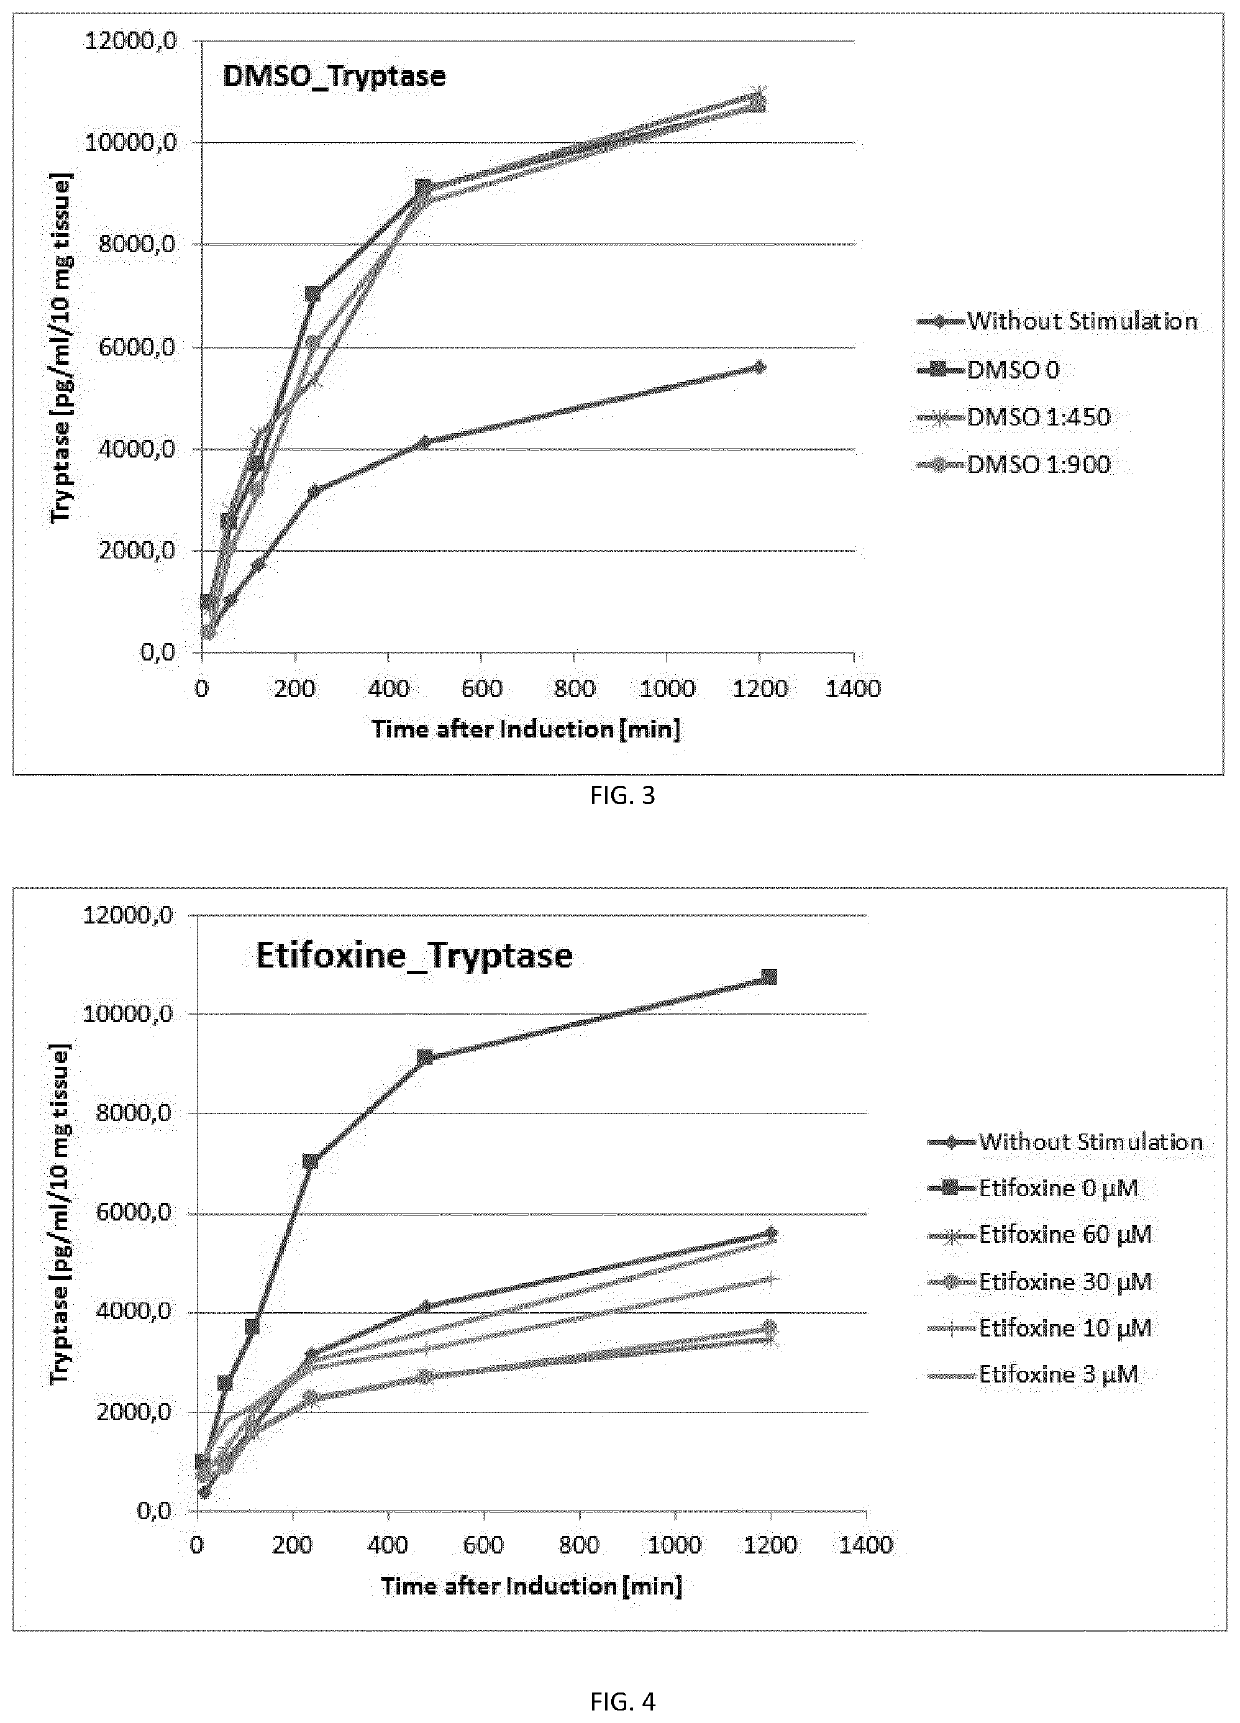 Etifoxine for use in the treatment of diseases related to activated mast cells